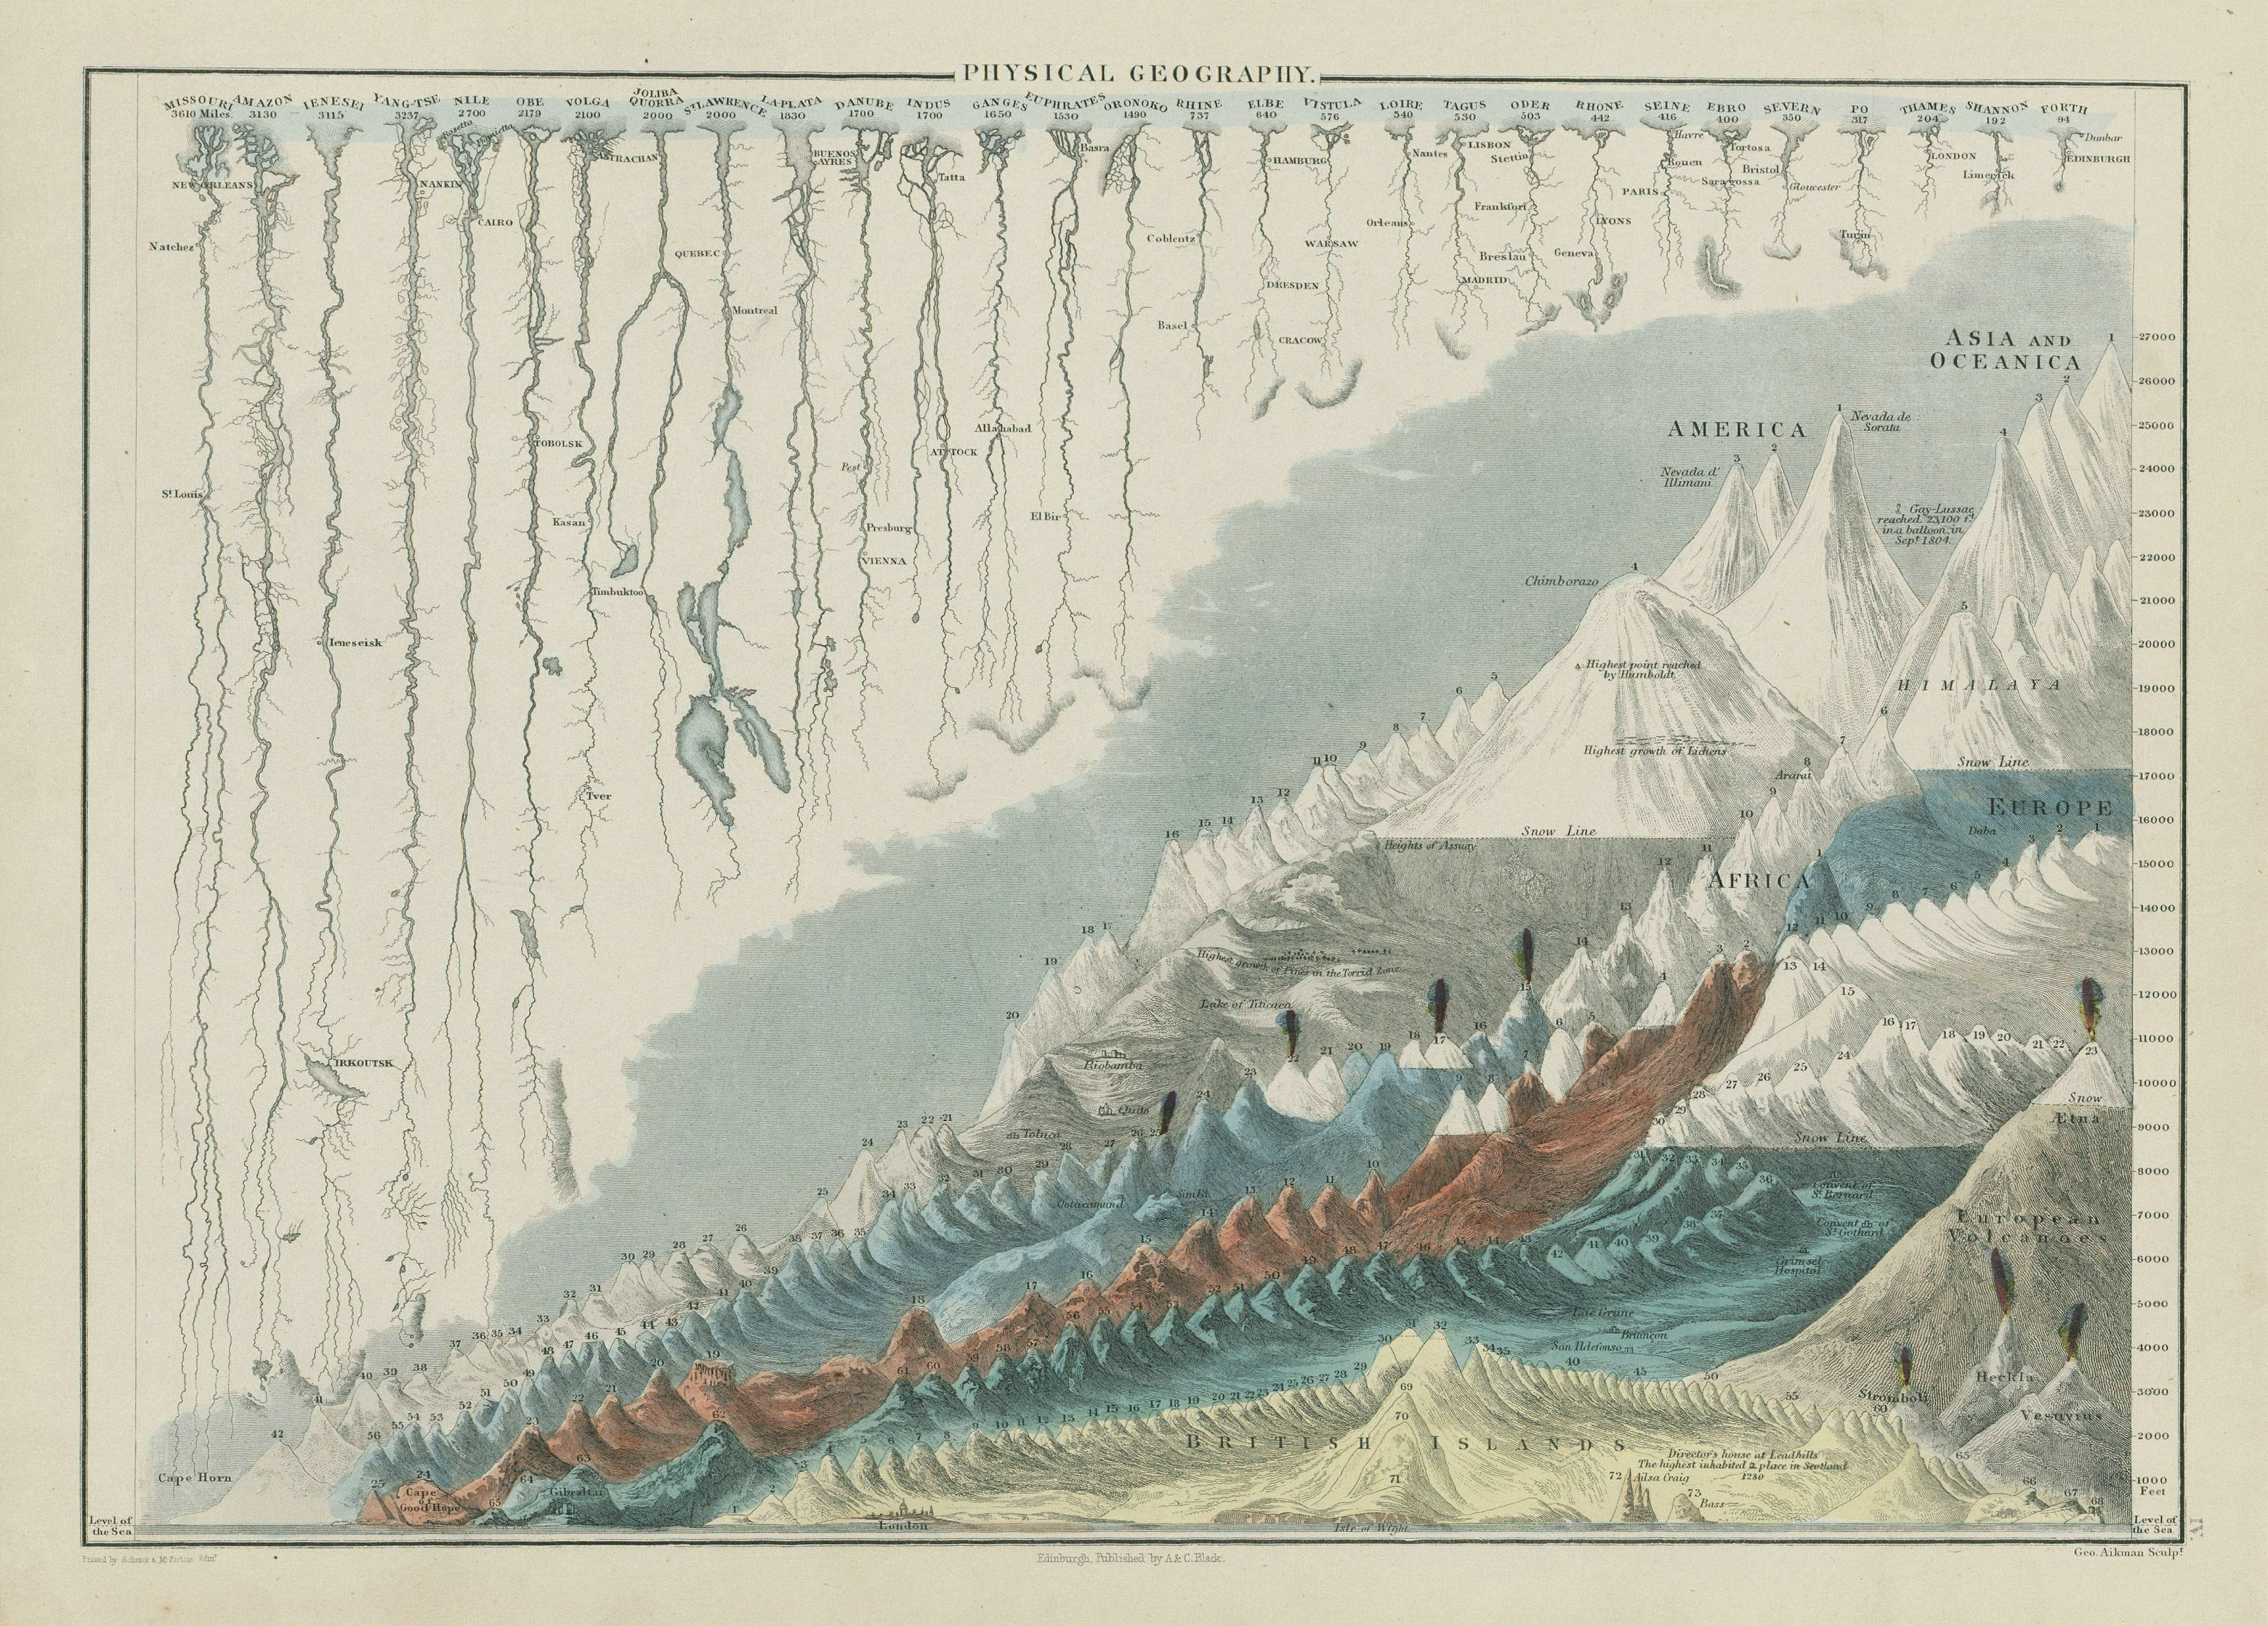 Associate Product Rivers and mountains. Physical geography. World. GEORGE AIKMAN 1856 old map